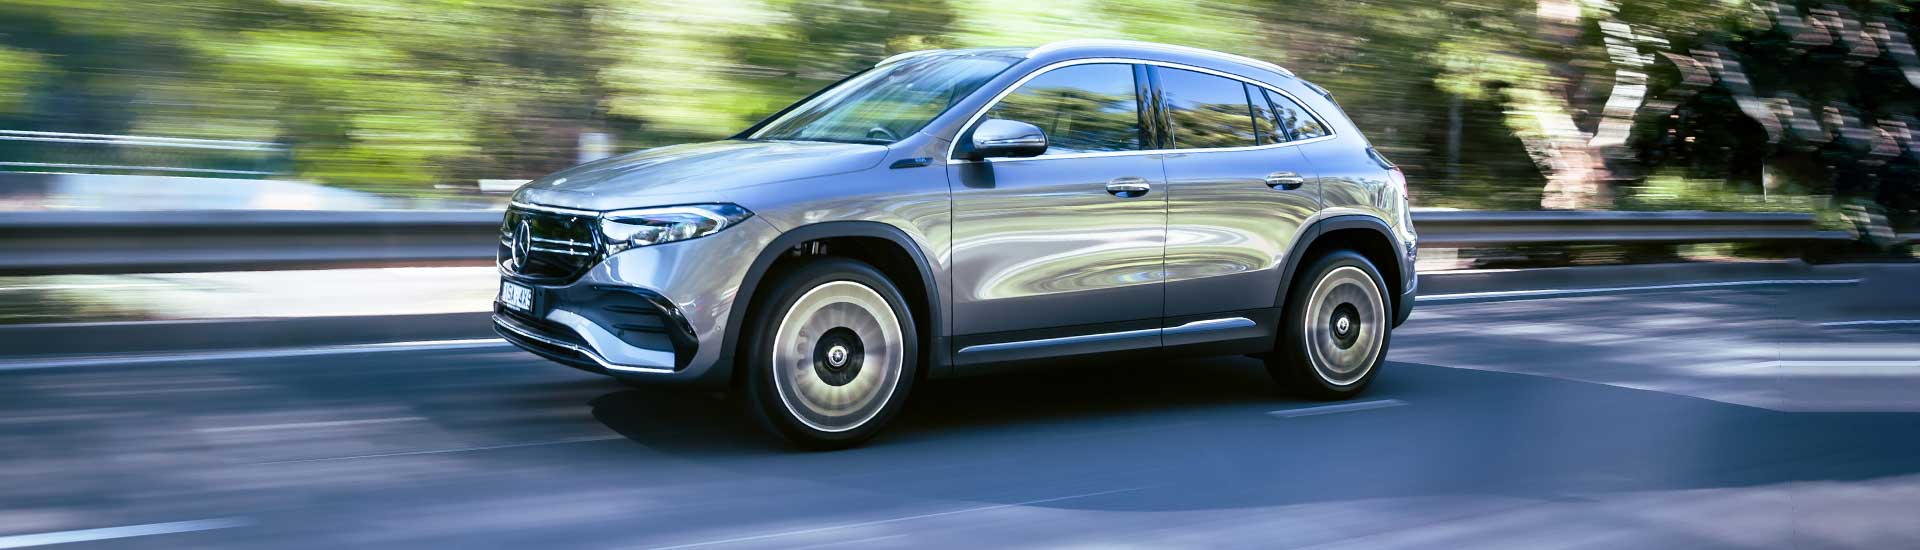 2021 Mercedes-Benz EQA price and specs: Electric SUV from $76,800 plus  on-road costs - Drive